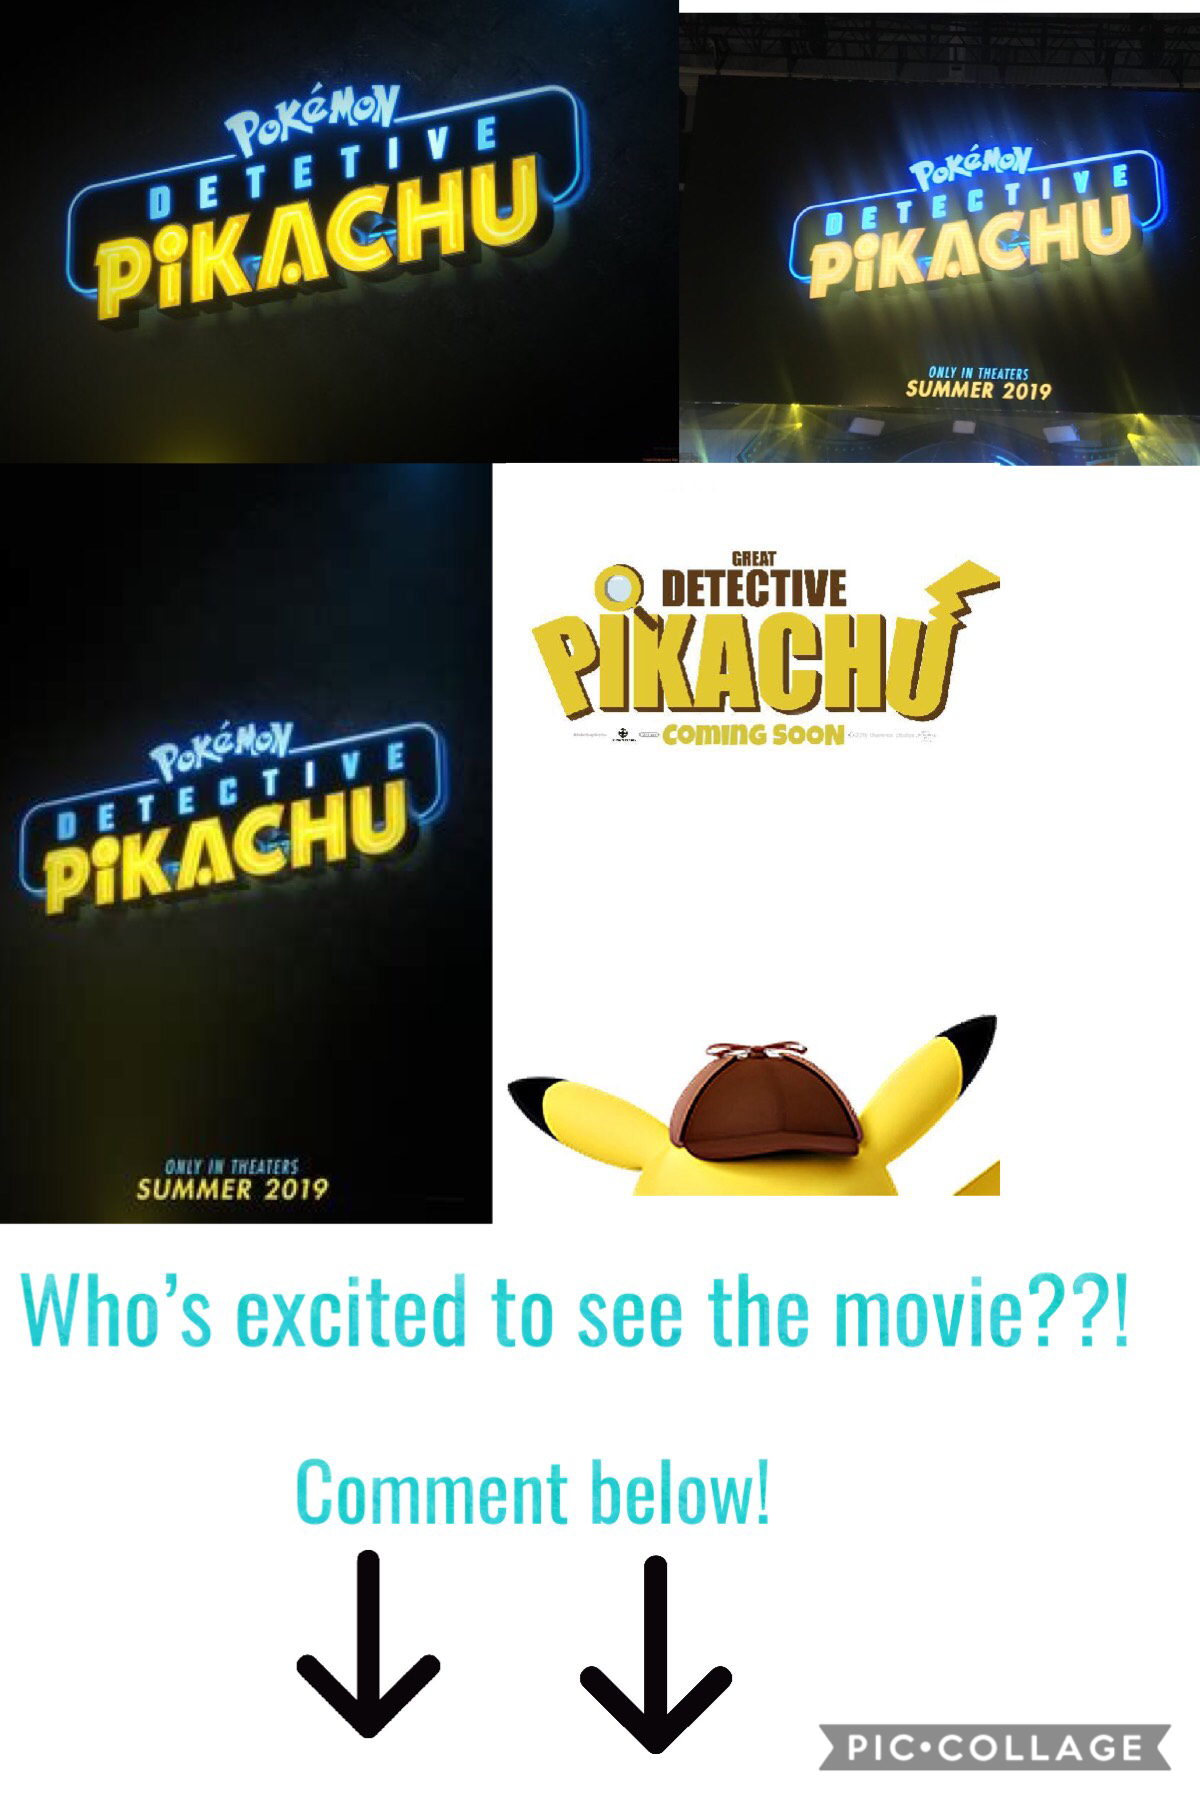 Are you excited to see the Detective Pikachu movie?